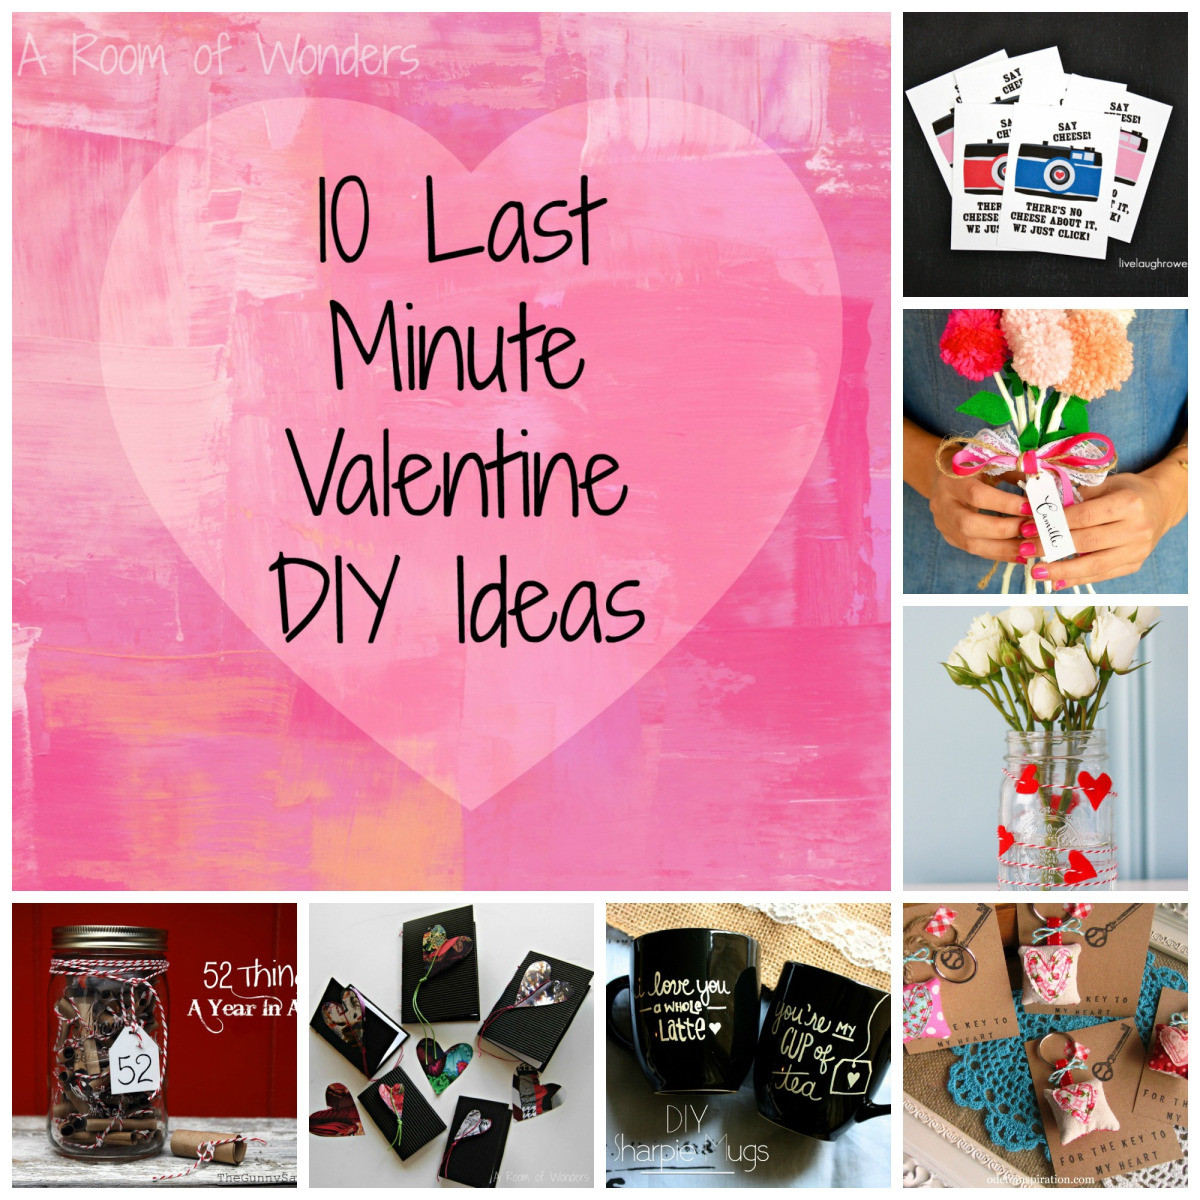 Last Minute Birthday Gift Ideas For Him
 Projects I like 10 Last Minute Valentine DIY Ideas – A